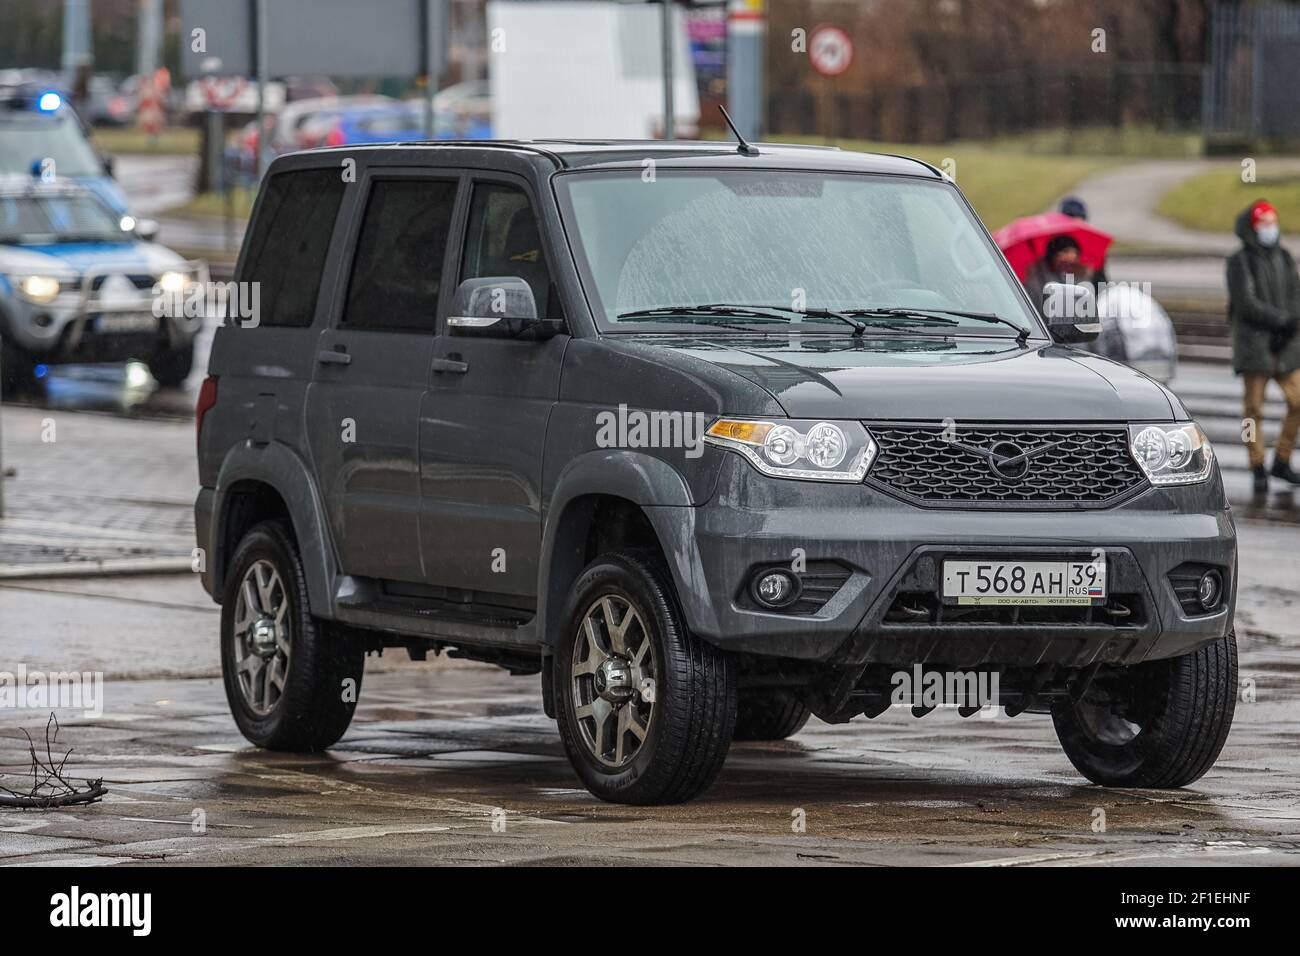 Gdansk, Poland 7th, March 2021 Russian UAZ Patriot SUV is seen in Gdansk, Poland on 7 March 2021 The UAZ Patriot model UAZ-3163 is a mid-size body on frame 4x4 SUV produced by the UAZ division of SeverstalAvto in Ulyanovsk, Russia. Credit: Vadim Pacajev/Alamy Live News Stock Photo